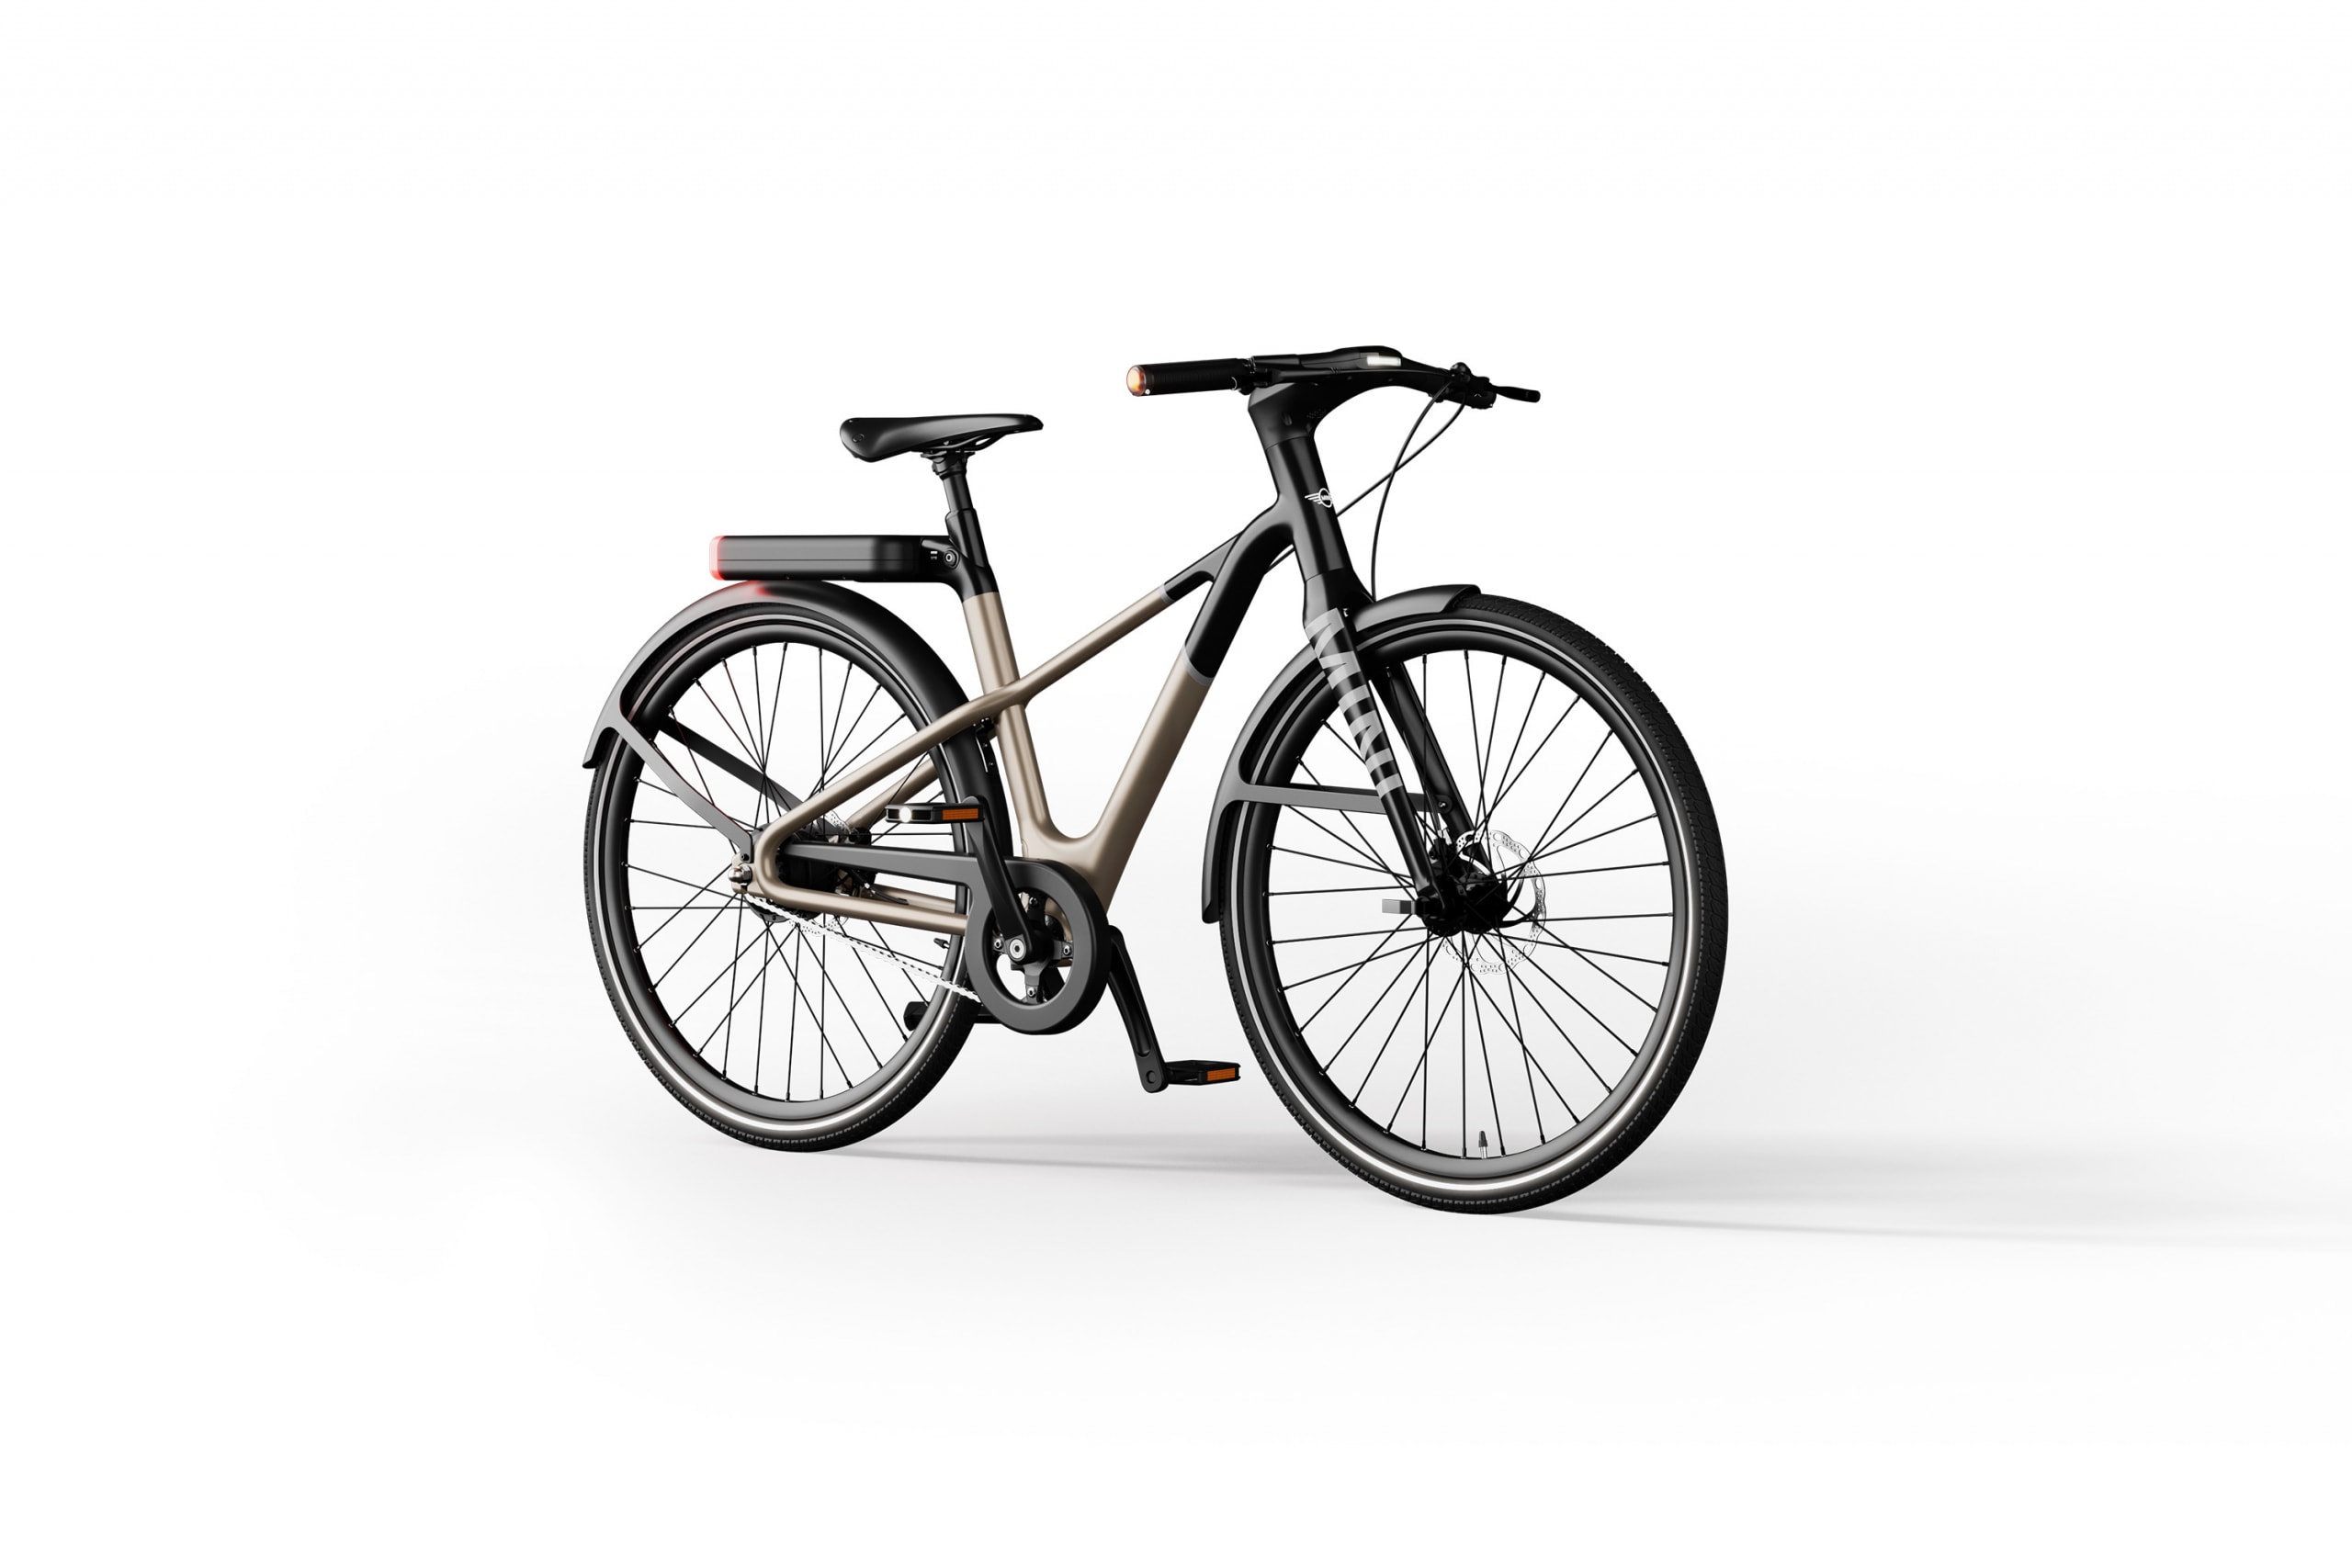 Angell Mobility Collaborates with Iconic Carmaker on Limited Edition MINI E-Bike 1